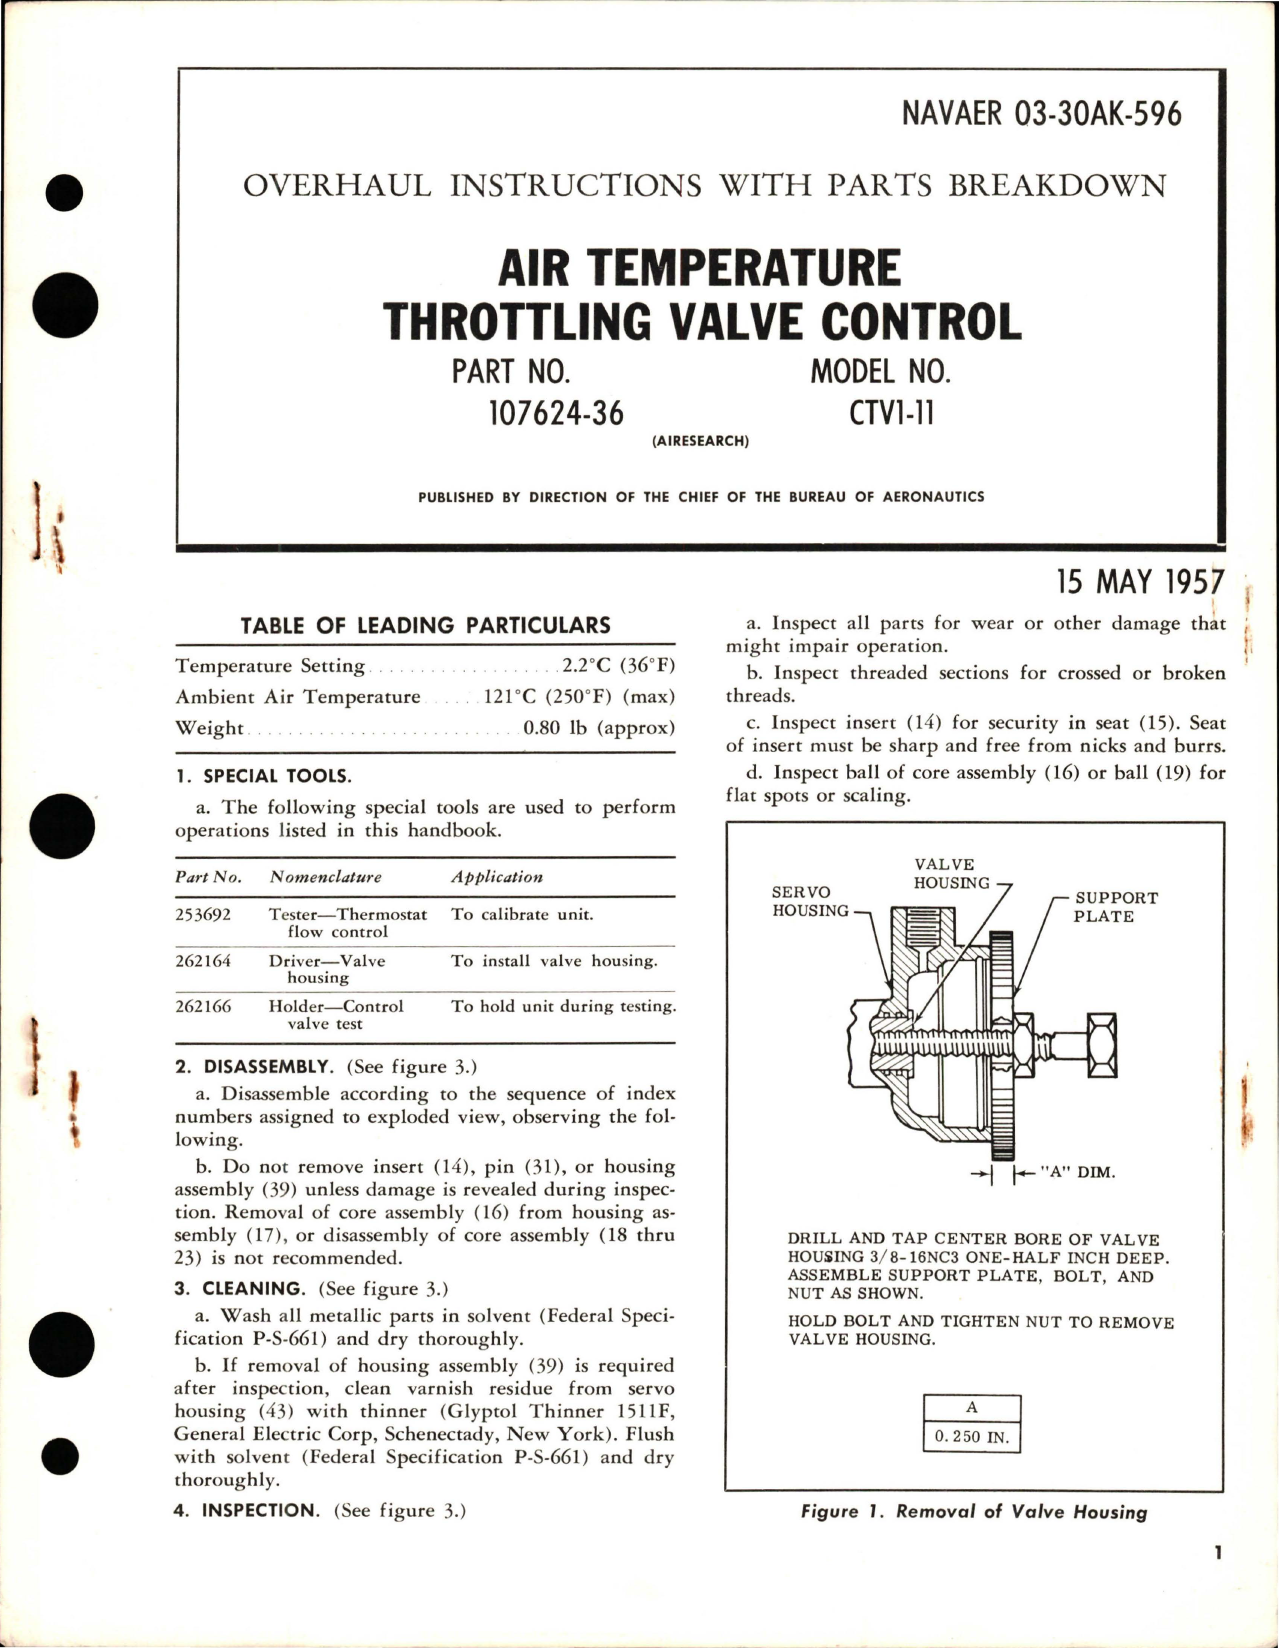 Sample page 1 from AirCorps Library document: Overhaul Instructions with Parts Breakdown for Air Temperature Throttling Valve Control - Part 107624-36 - Model CTV1-11 